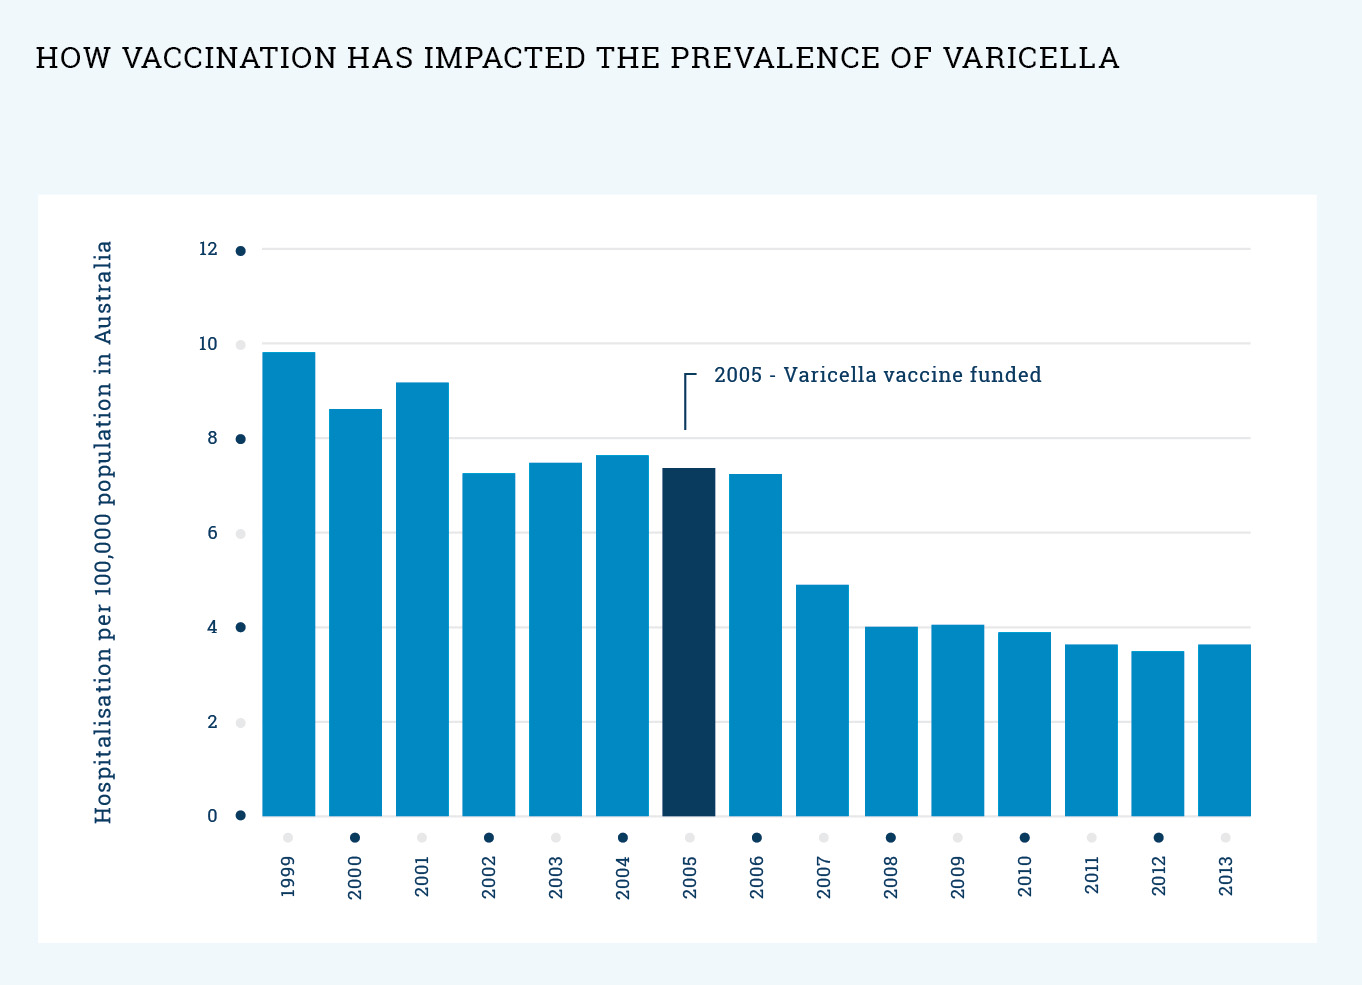 graph: What impact has vaccination had on the prevalence of varicella (chickenpox)?